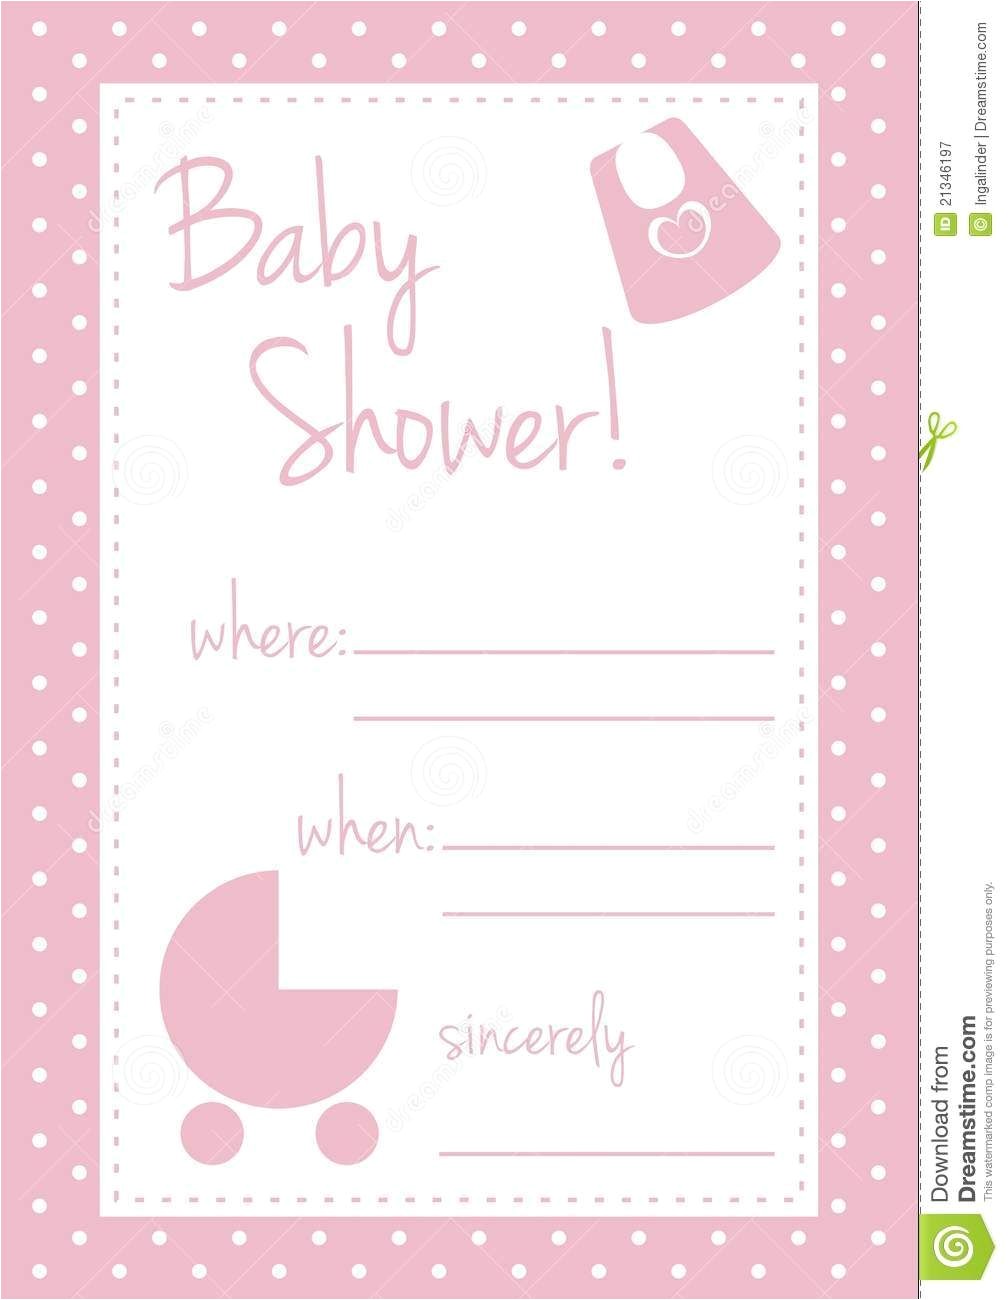 Greetings for Baby Shower Invitations Baby Shower Invitation Card